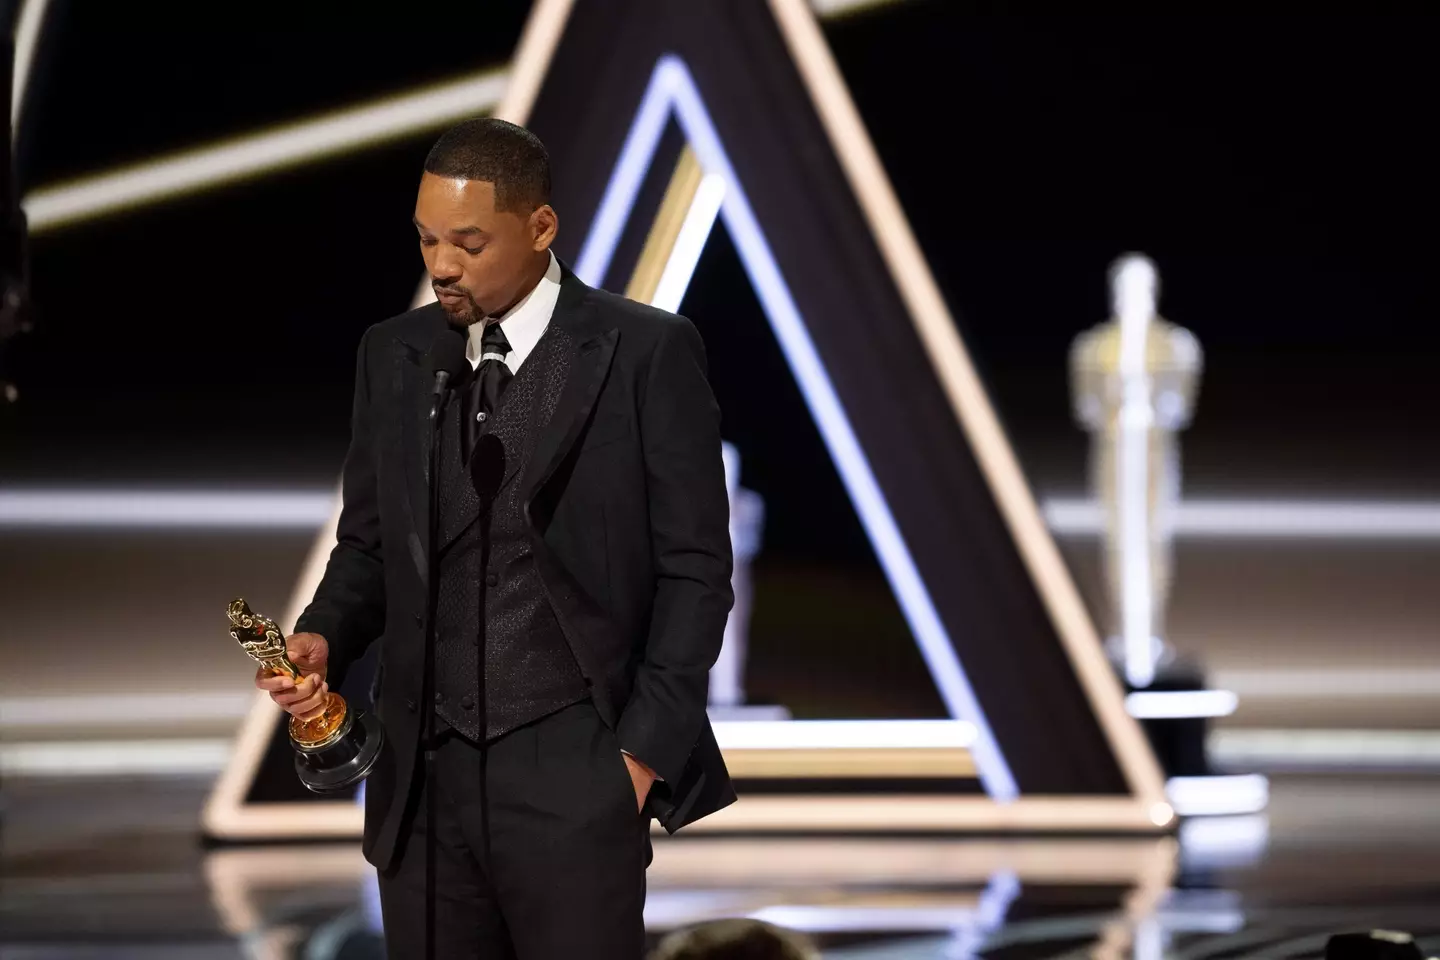 Will Smith apologised to the Academy while accepting his Oscar.